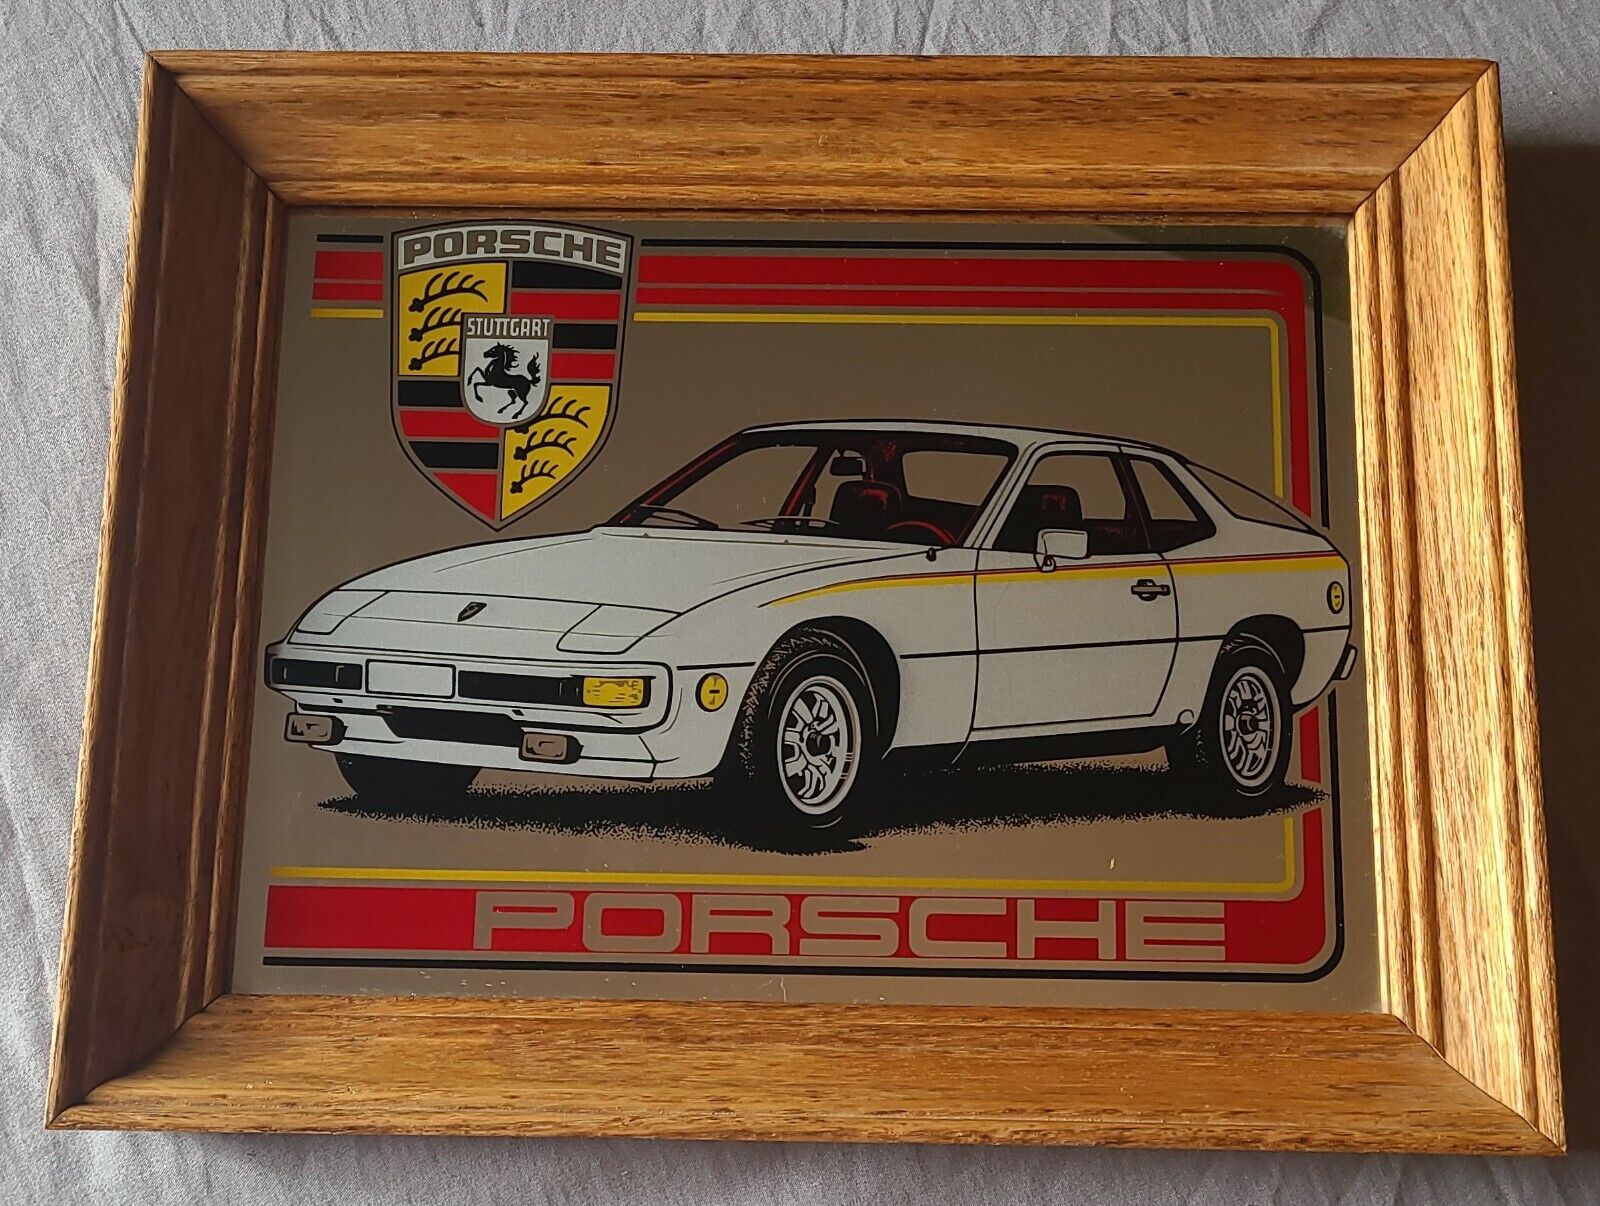 EXTREMELY RARE STAMFORD ART VINTAGE PORSCHE WOOD FRAME IN EXCELLENT CONDITION